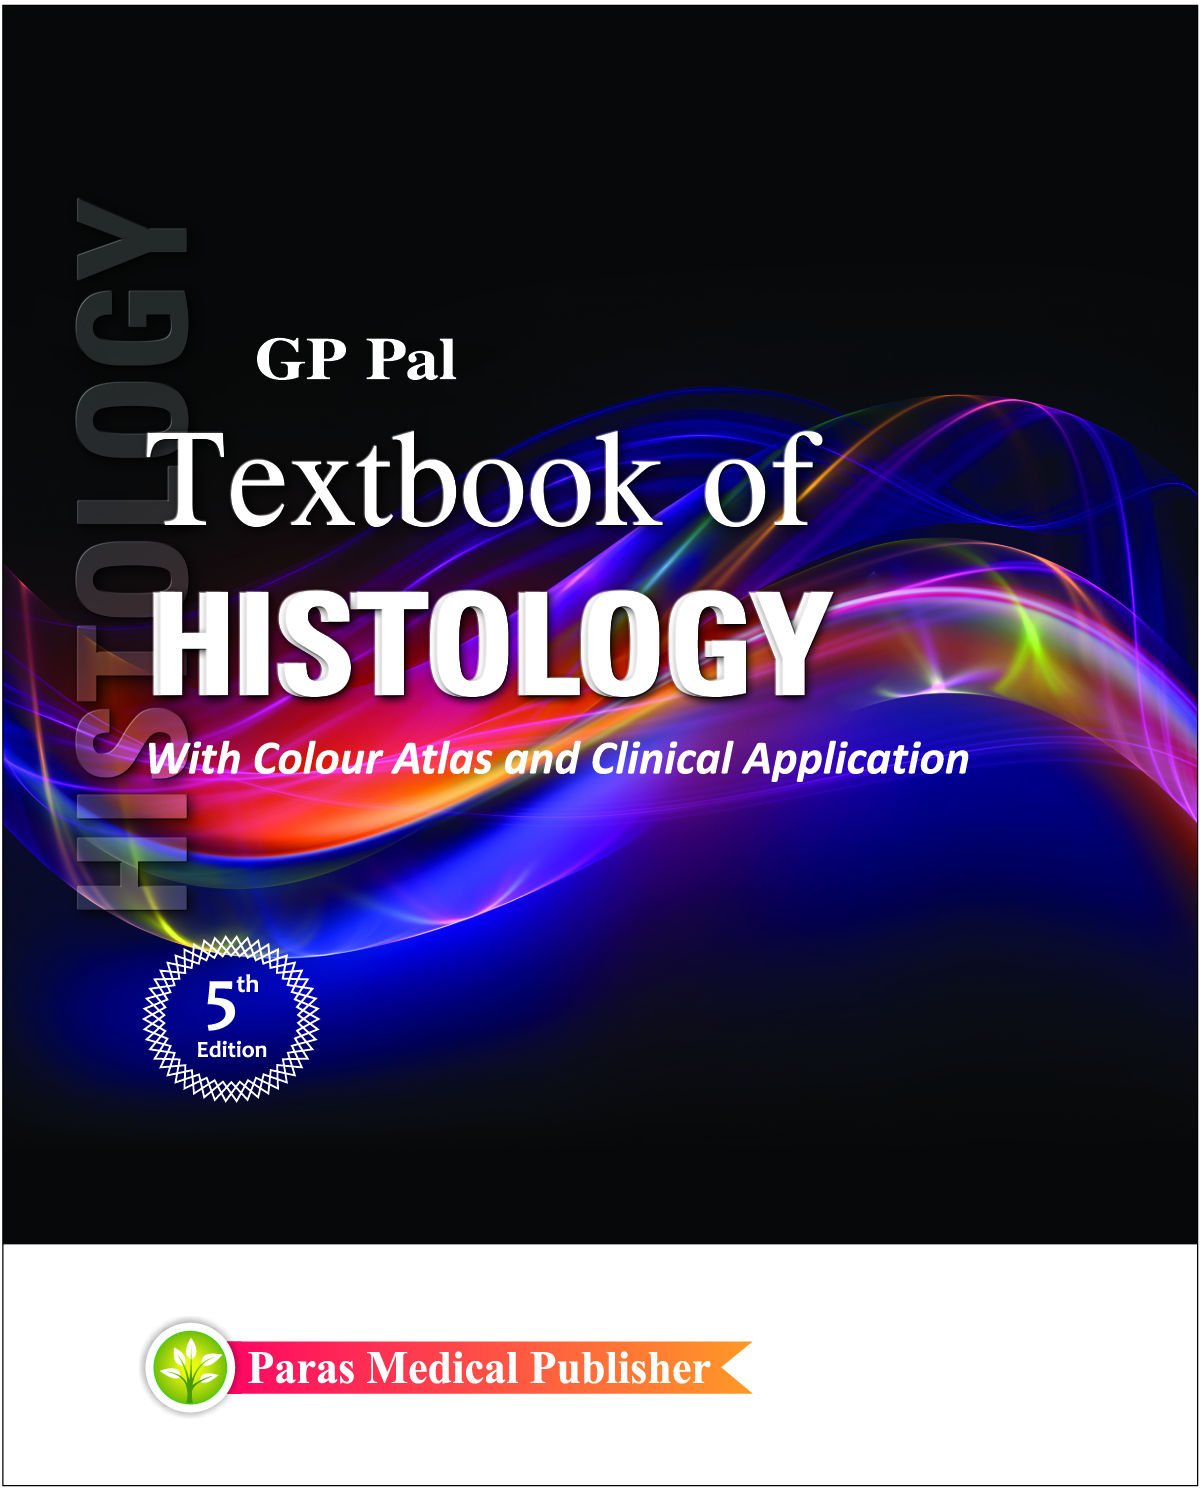 Textbook Of Histology (With Color Atlas and Clinical Application) 5Ed